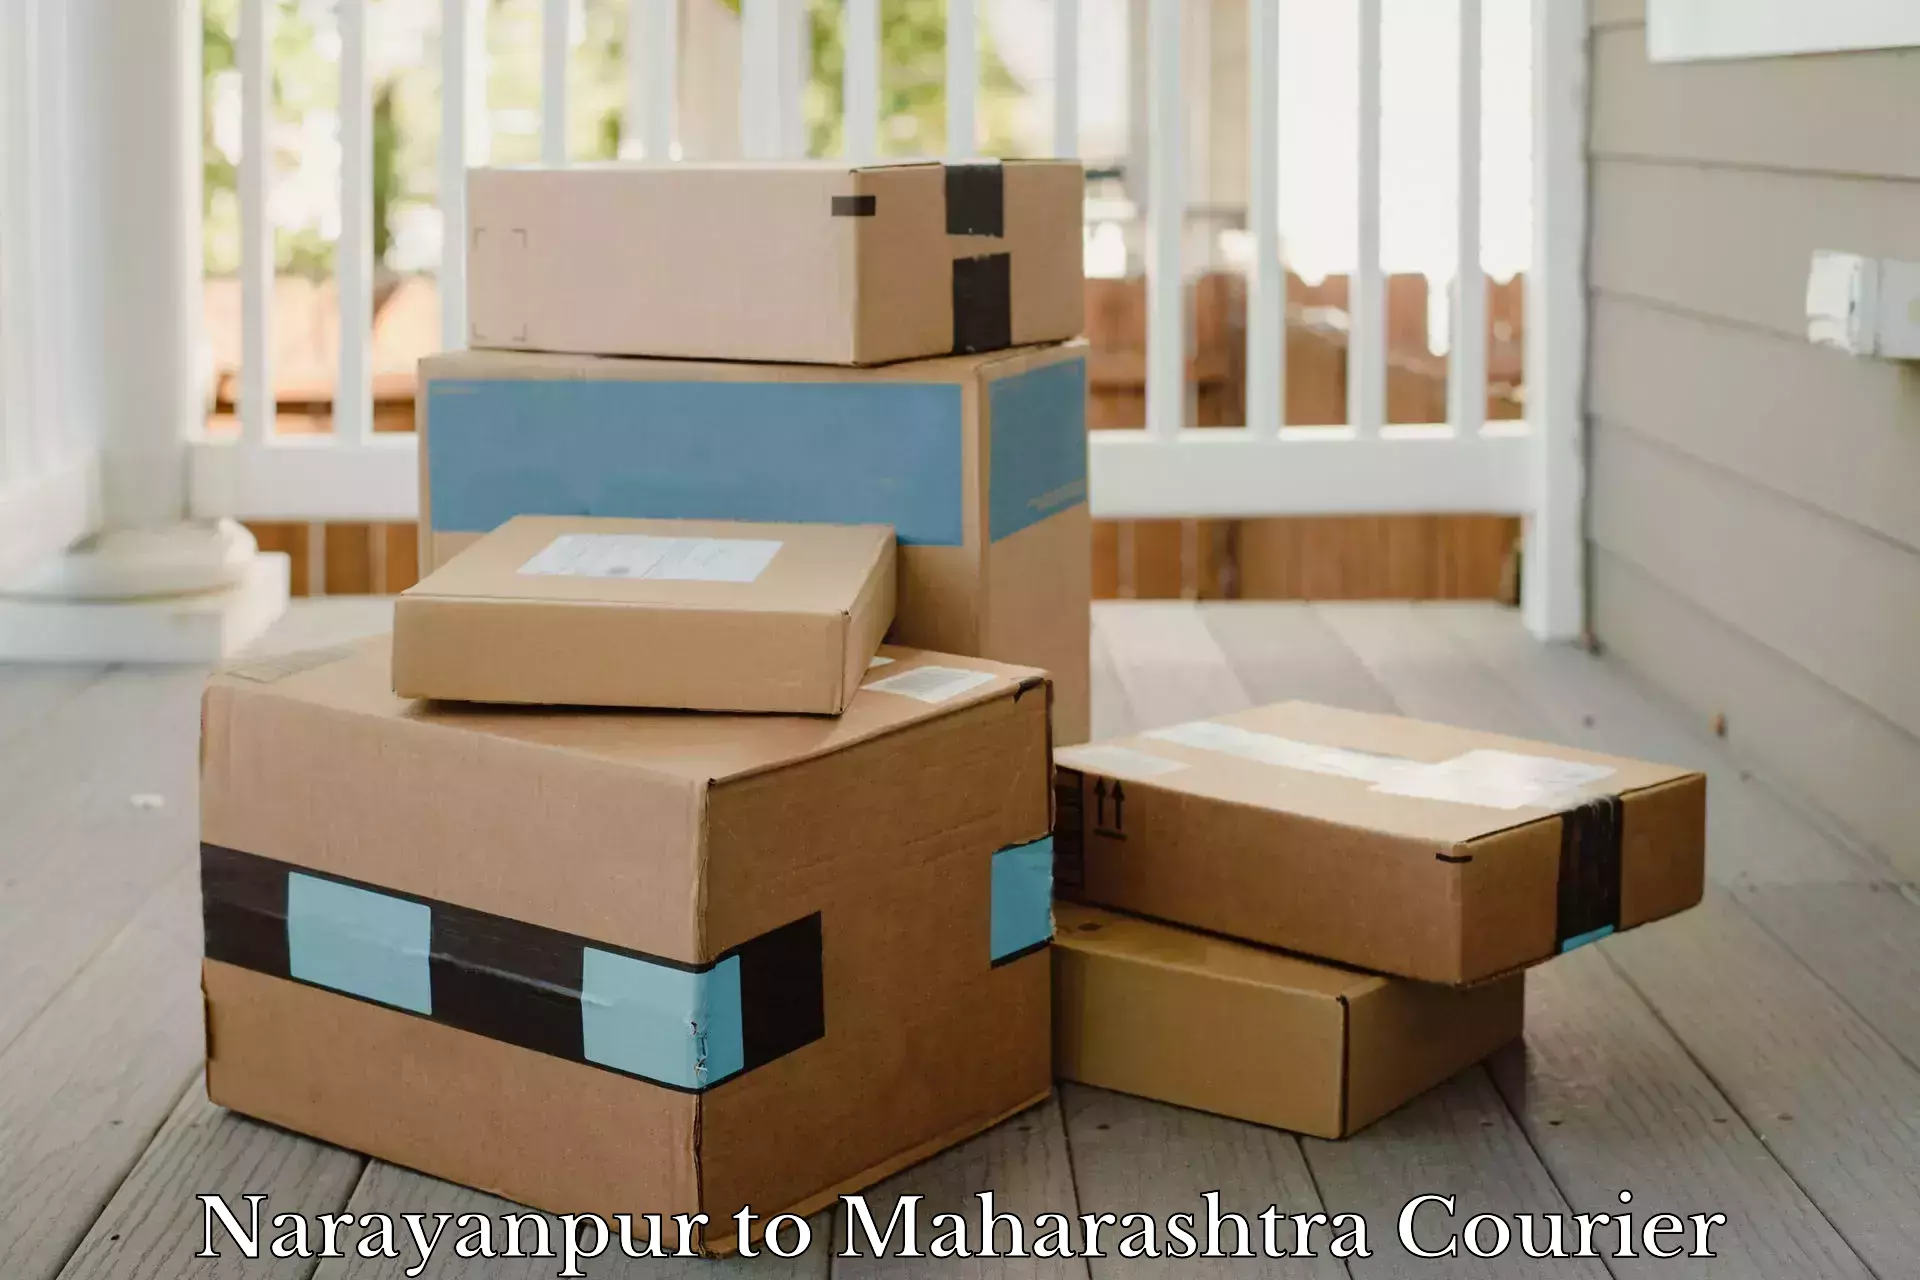 Multi-national courier services Narayanpur to Ballarpur